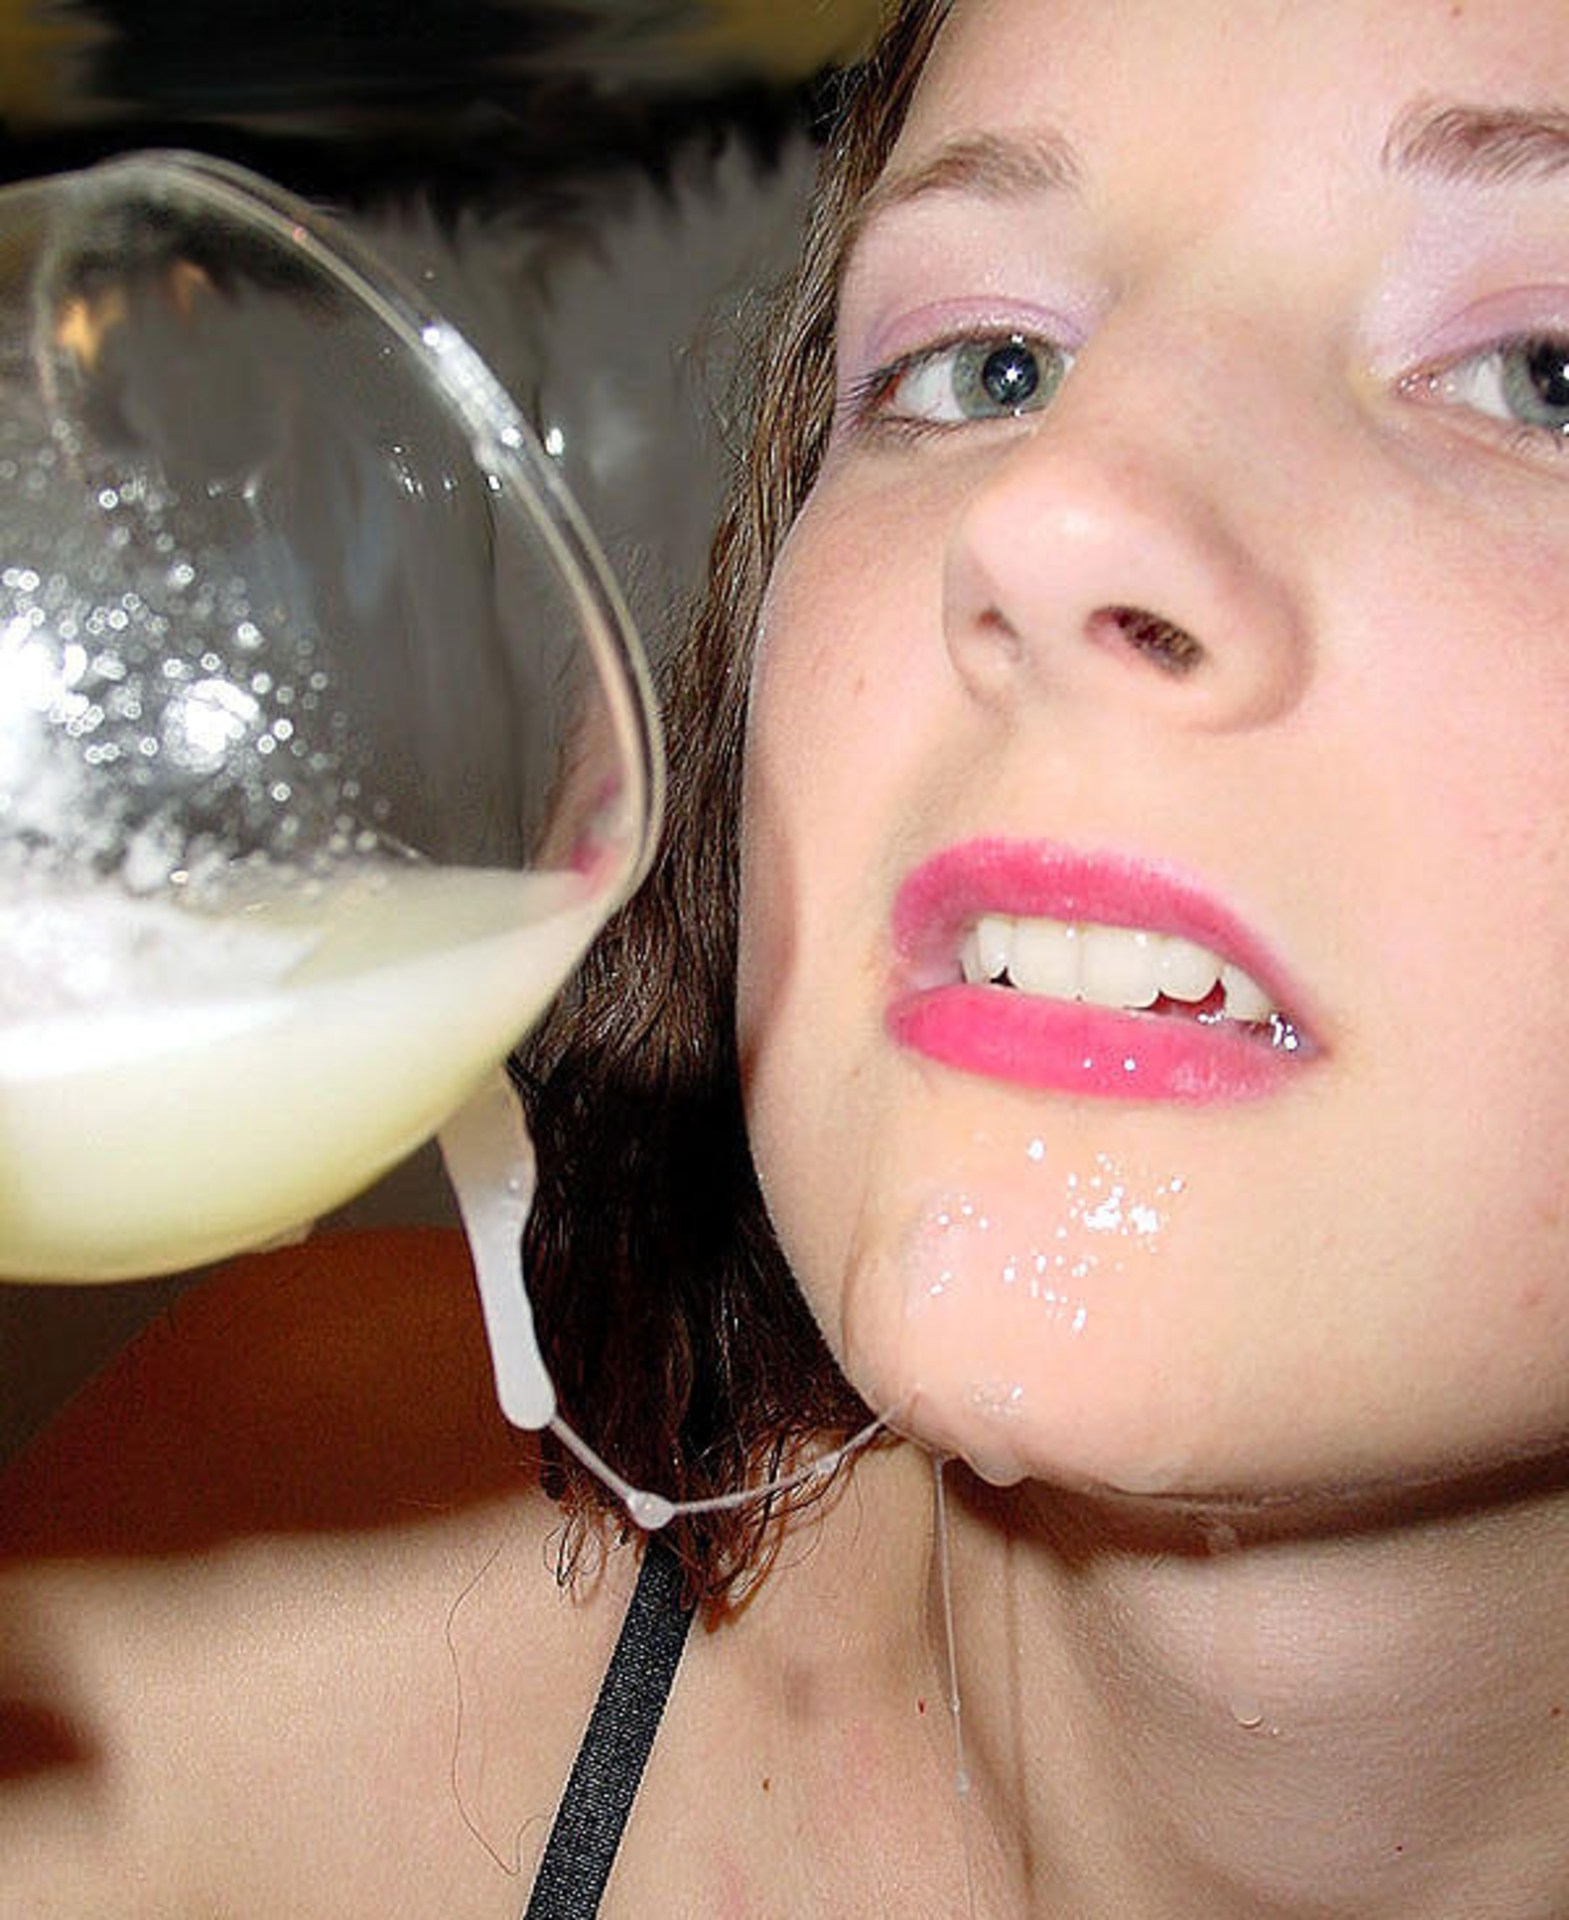 Women Drink Sperm by the Glass (83 photos) pic